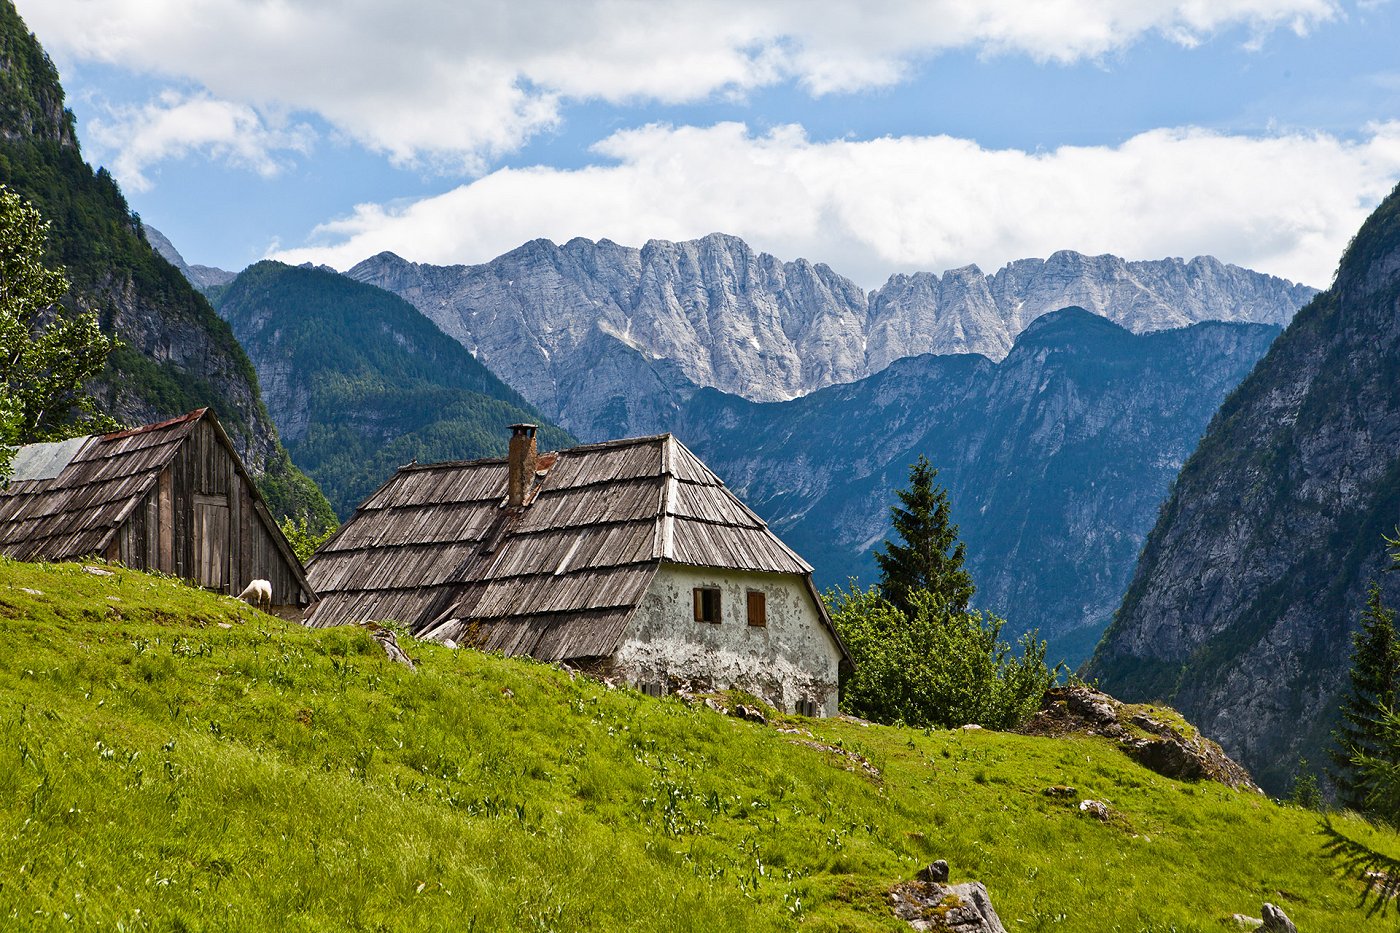 An old homestead with a wooden roof, in the background the Julian Alps